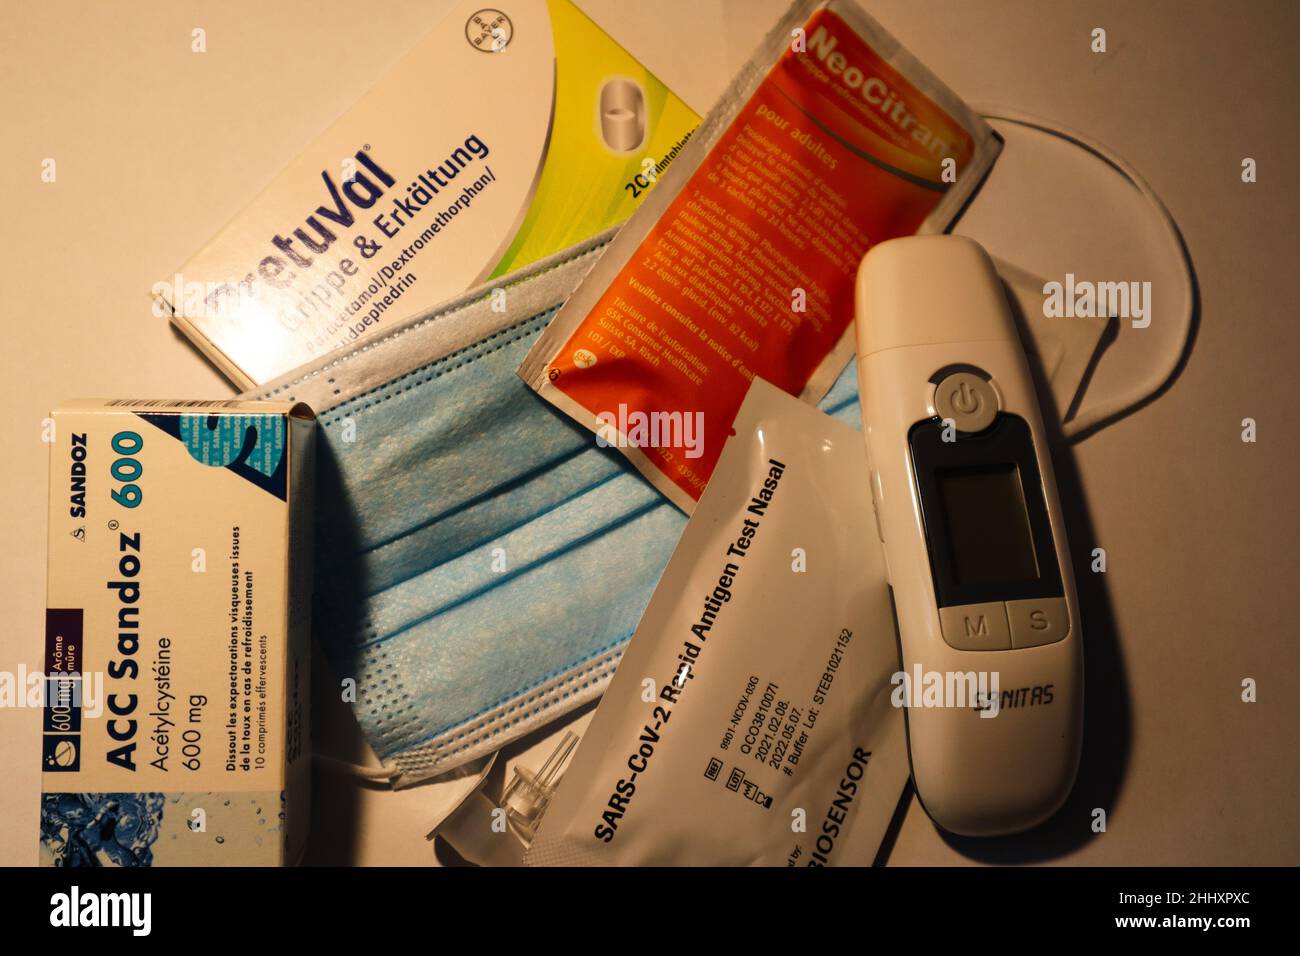 Berne, Switzerland, 05. January 2022: Medical Mask, Clinical Thermometer and Fever, Flu and Cold Medications. Stock Photo